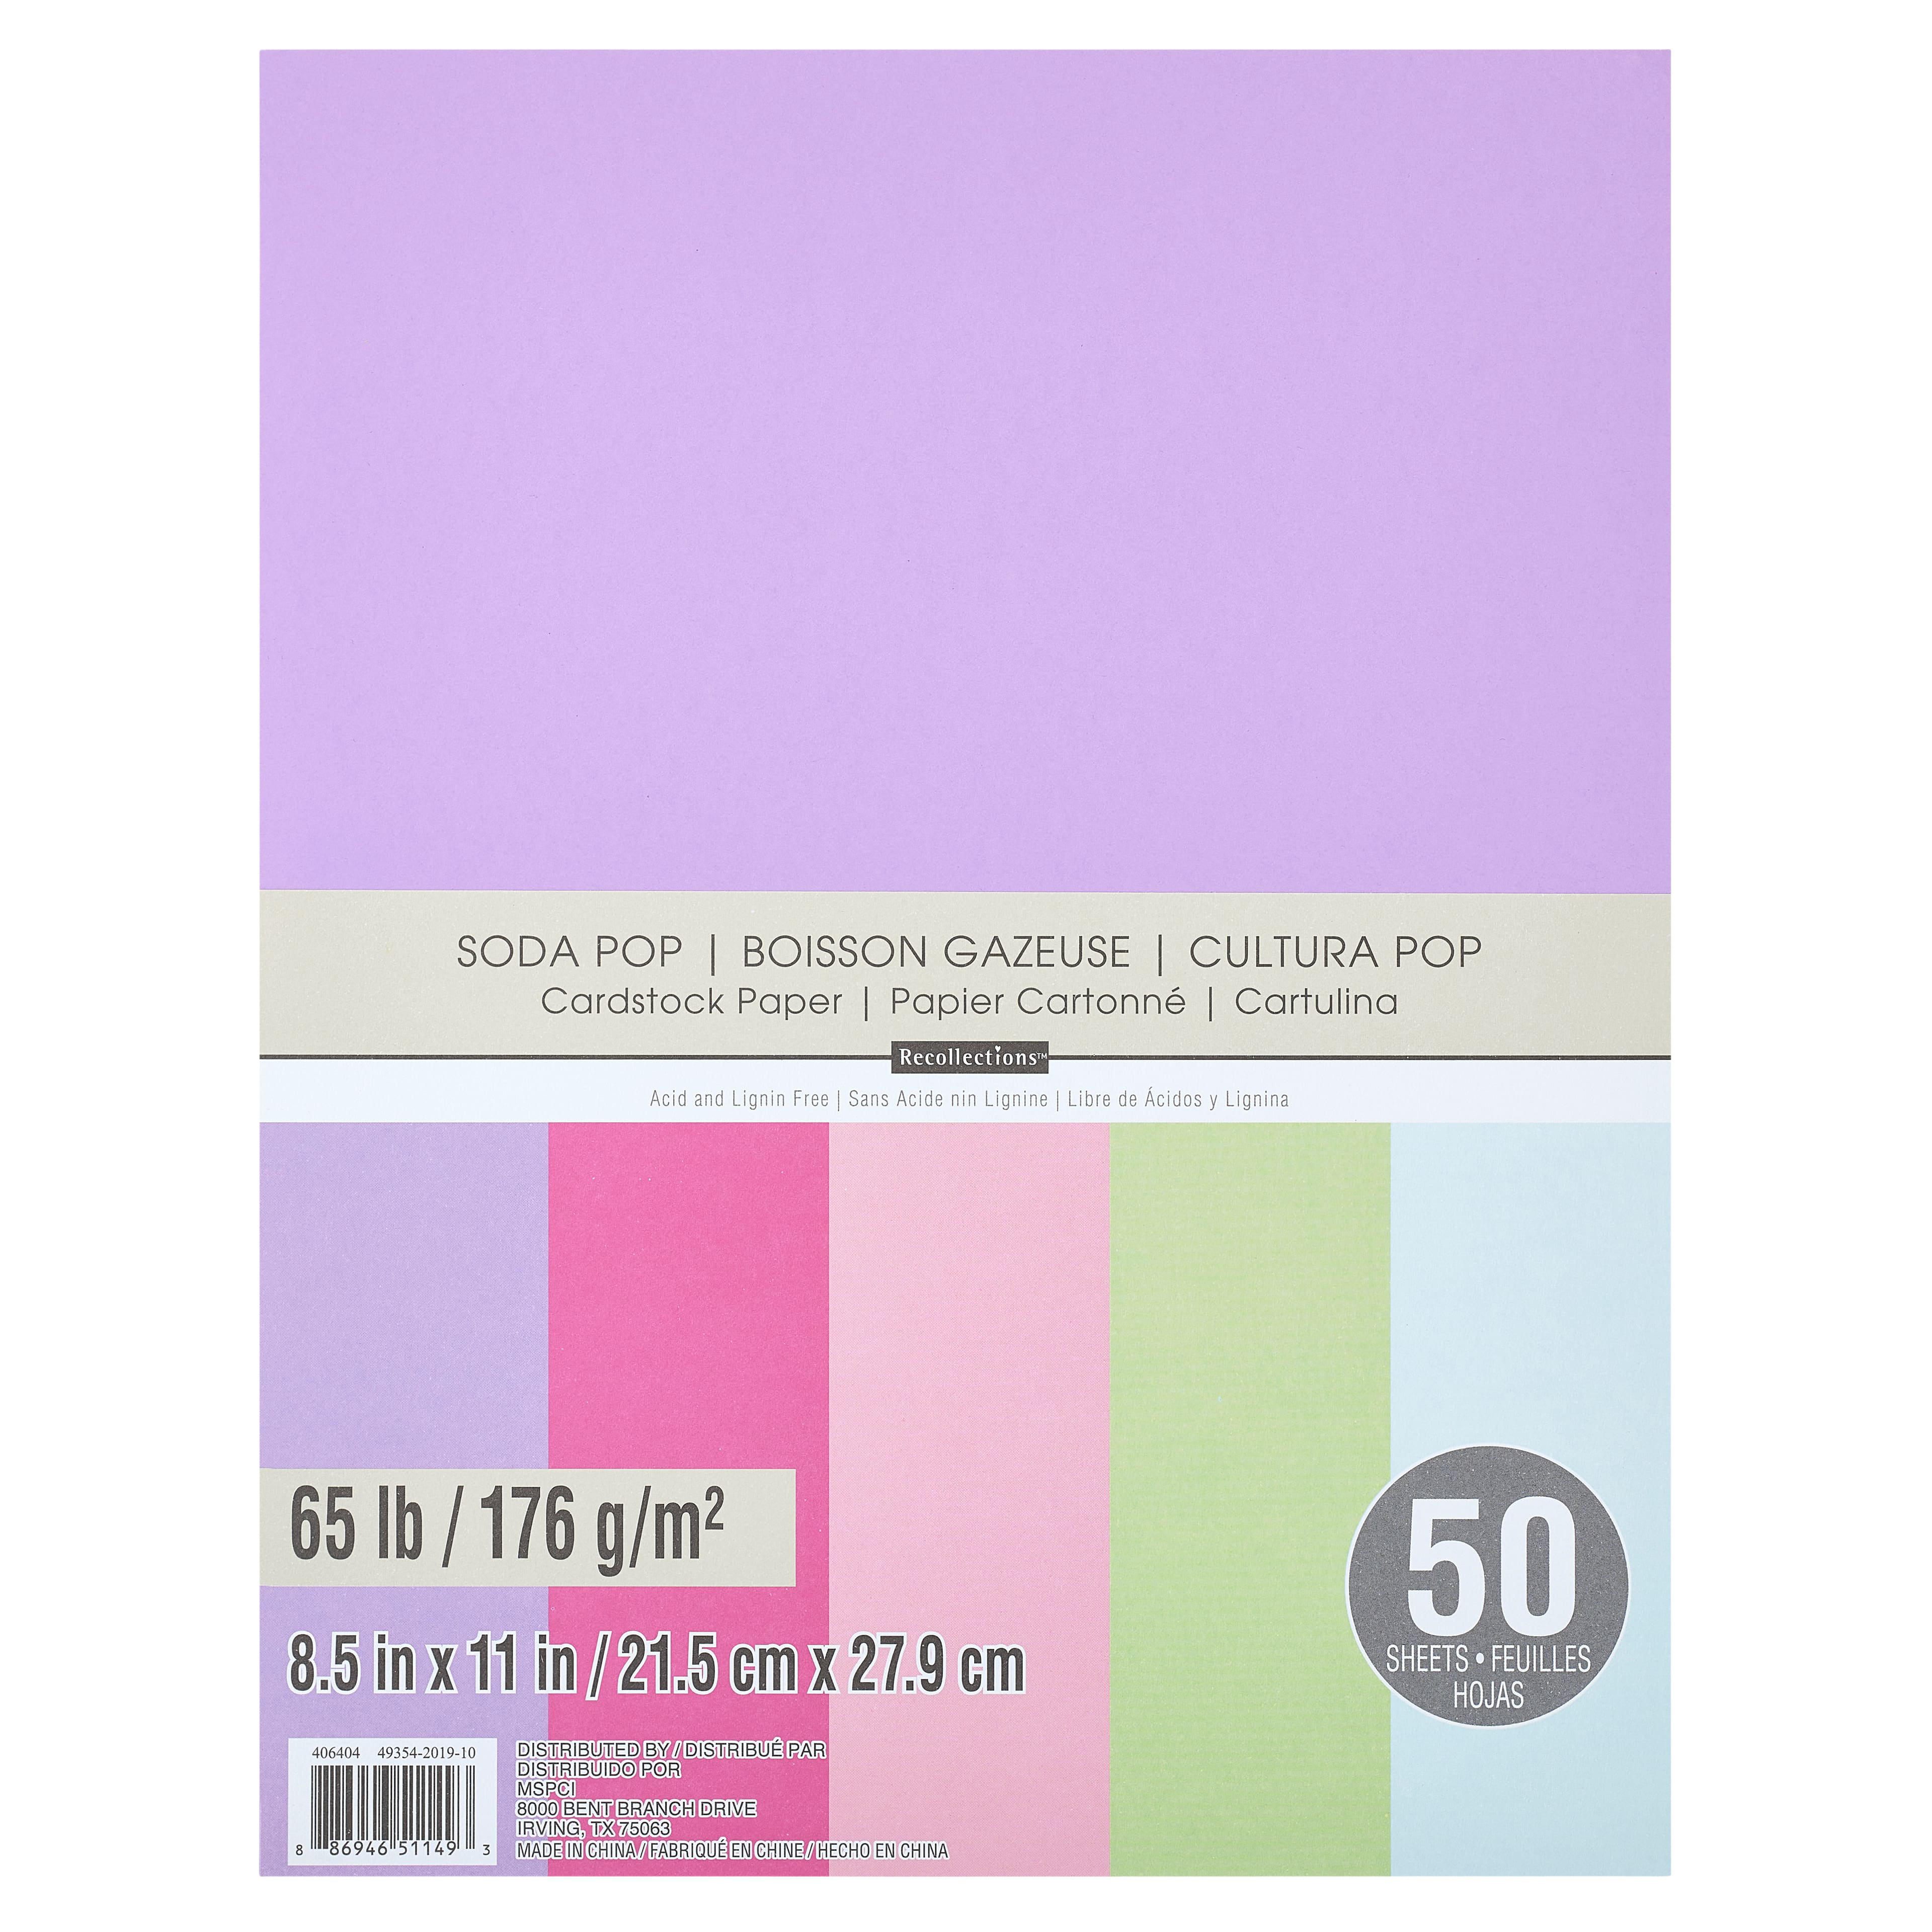 8.5 X 11 Recollections Cardstock Paper, Seaside, 50 Sheets